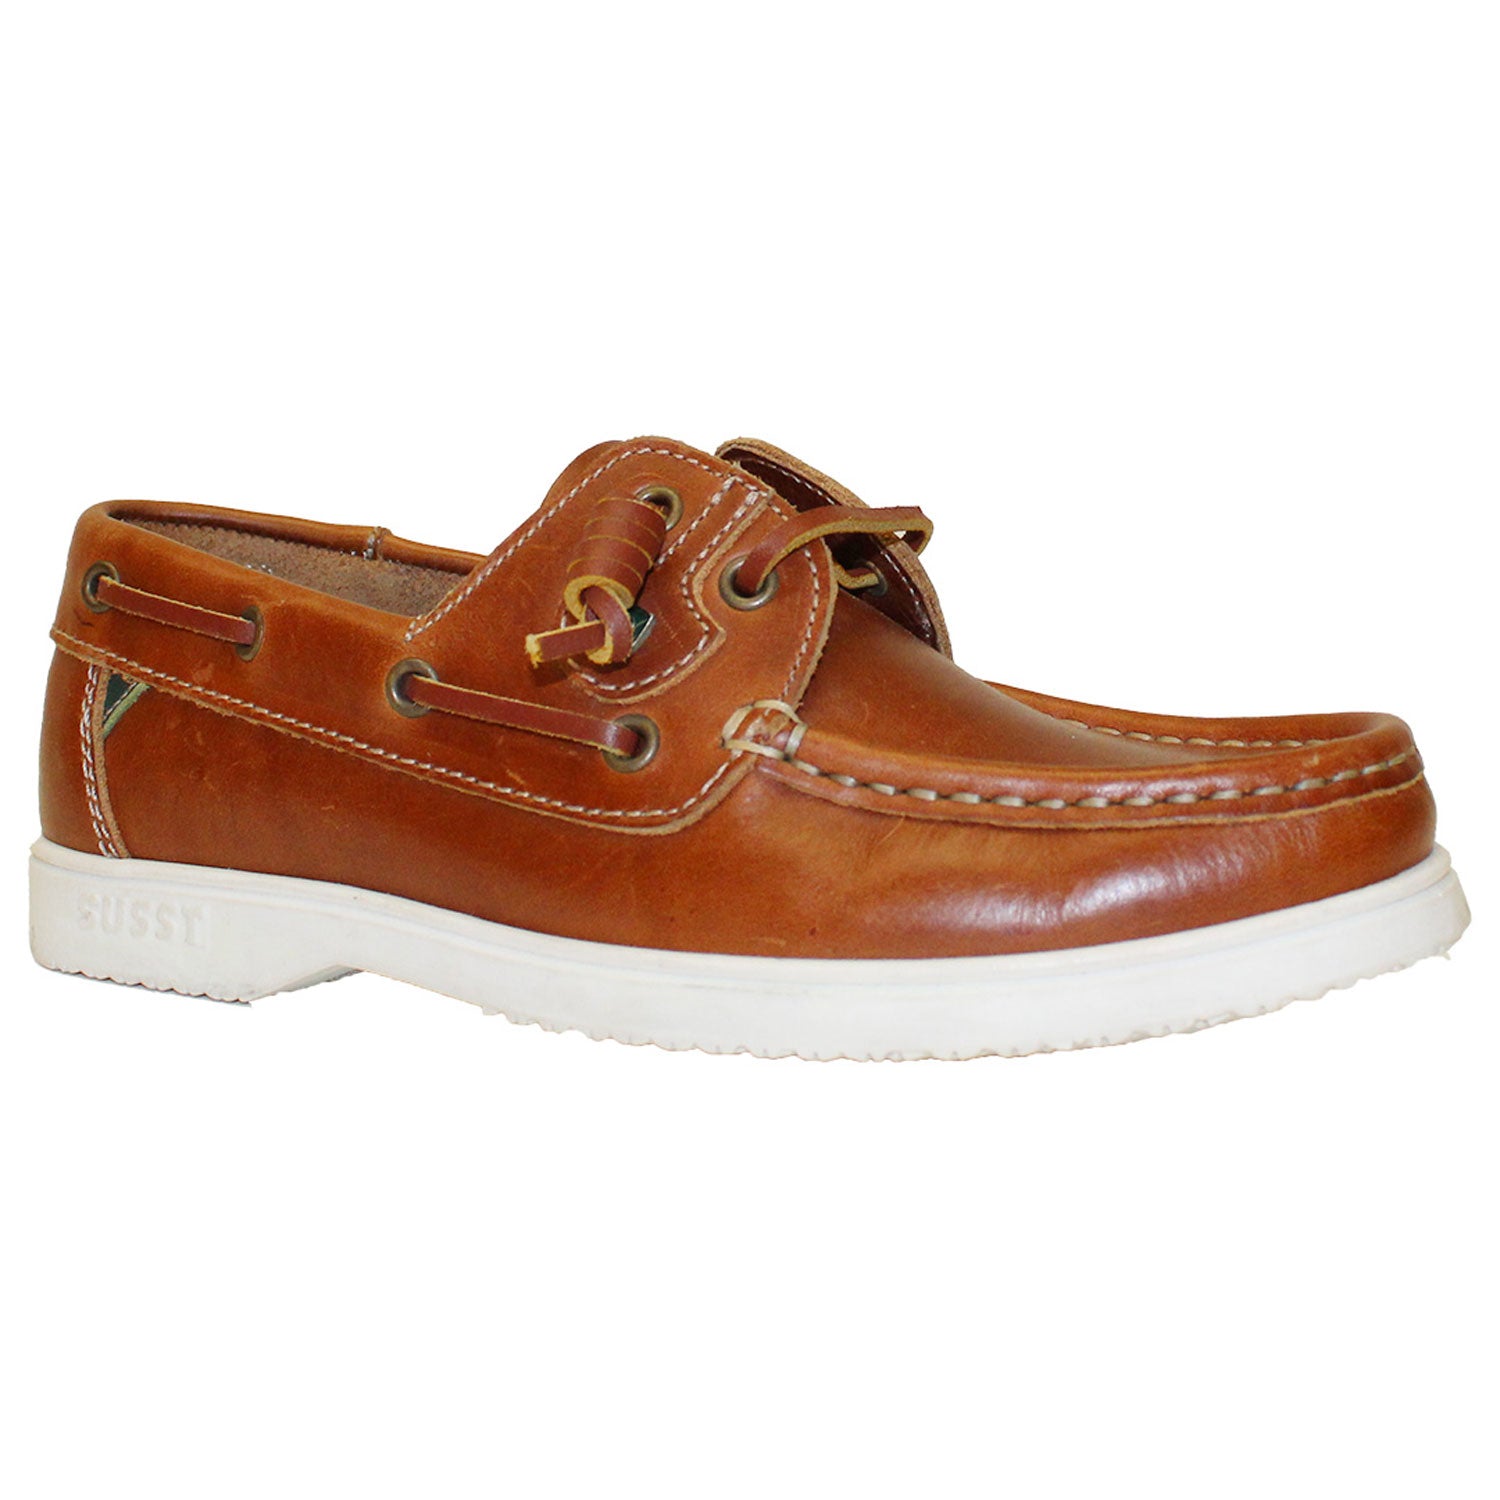 Susst Gaby Deck Shoe - Tan 1 Shaws Department Stores